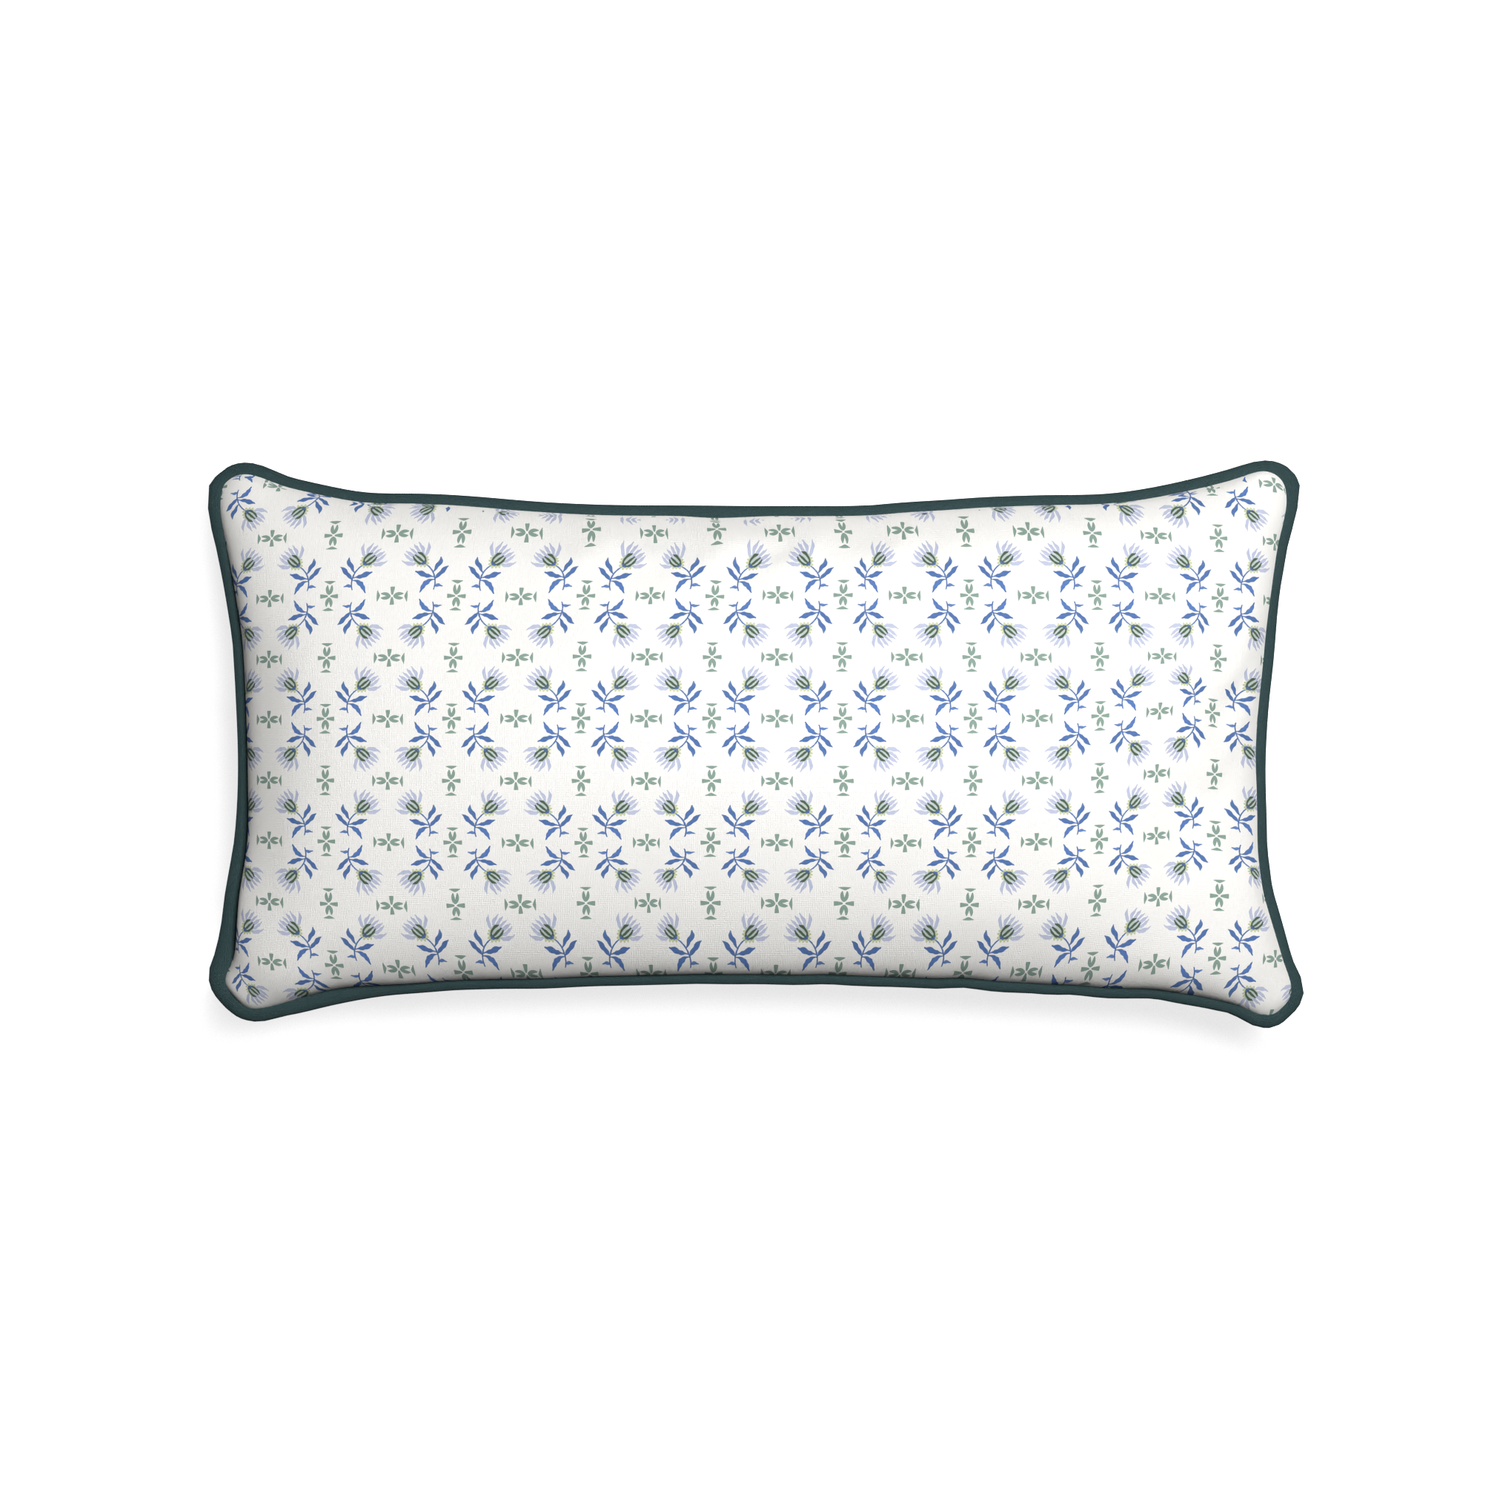 Midi-lumbar lee custom blue & green floralpillow with p piping on white background